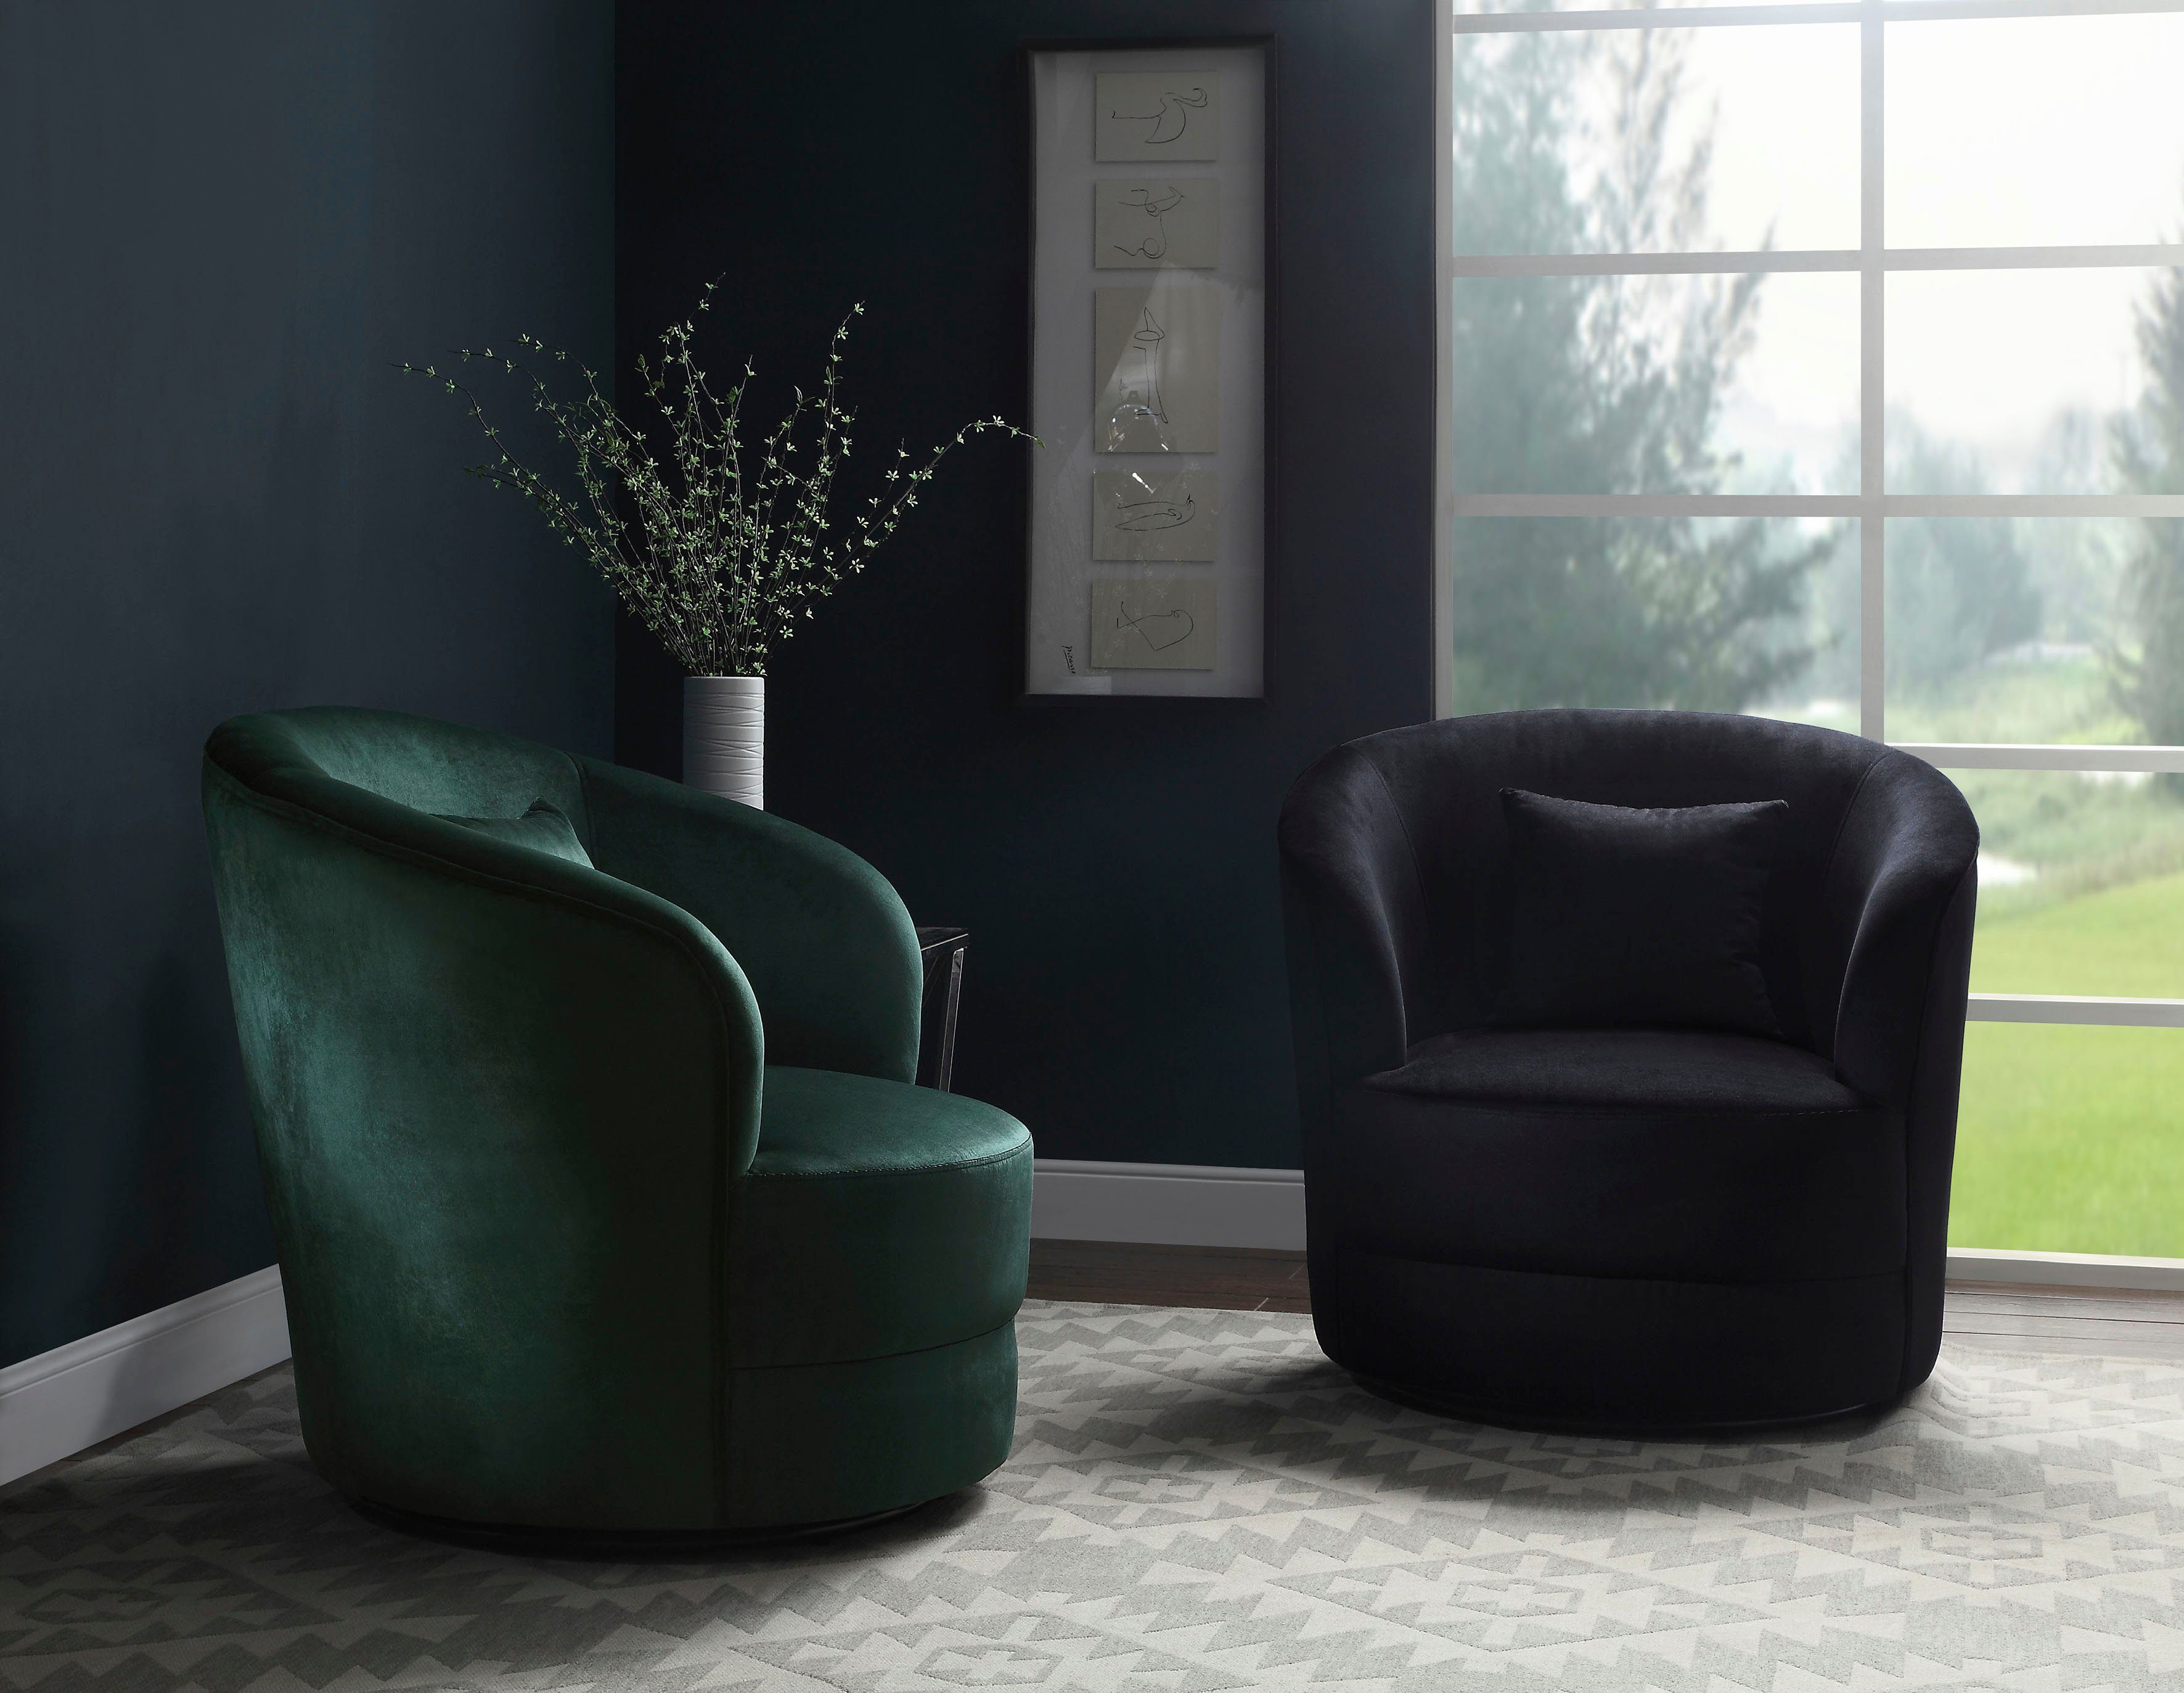 ATLANTIC home collection Draaibare fauteuil